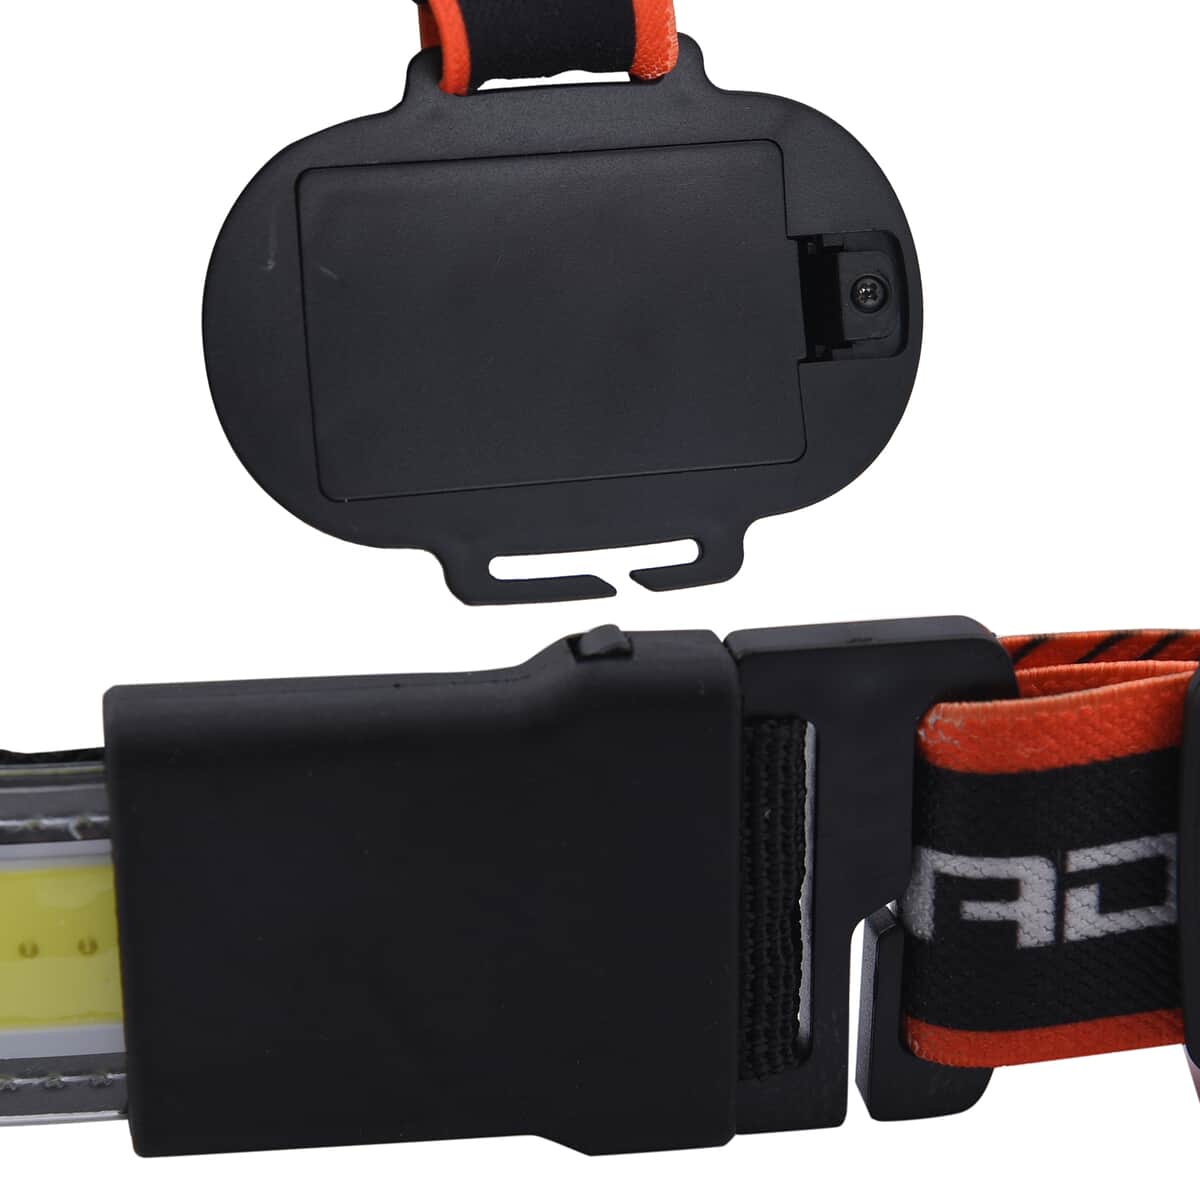 Black and Orange Ultra-Thin Led Headlight with 3 Levels of Adjustment 3 AAA Battery (not included) image number 6